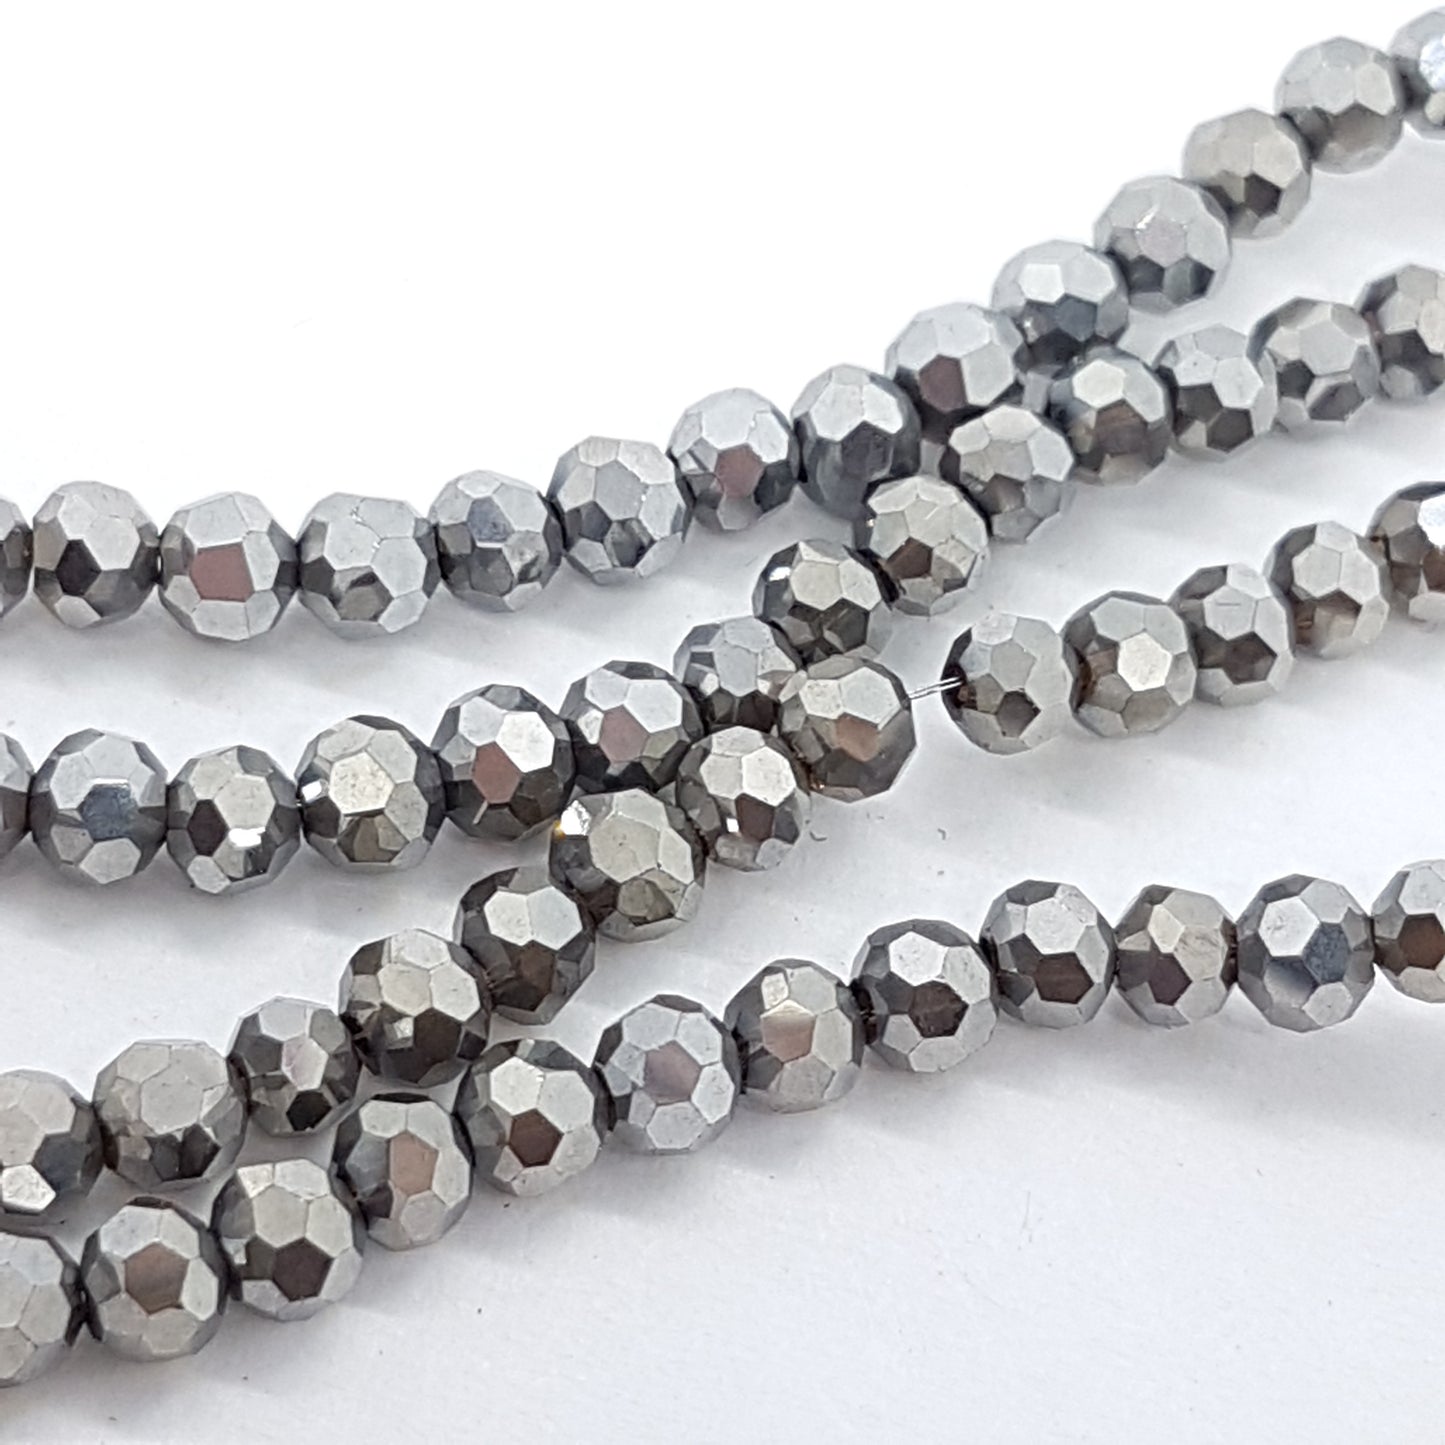 Metallic Silver Faceted Crystal Glass Beads